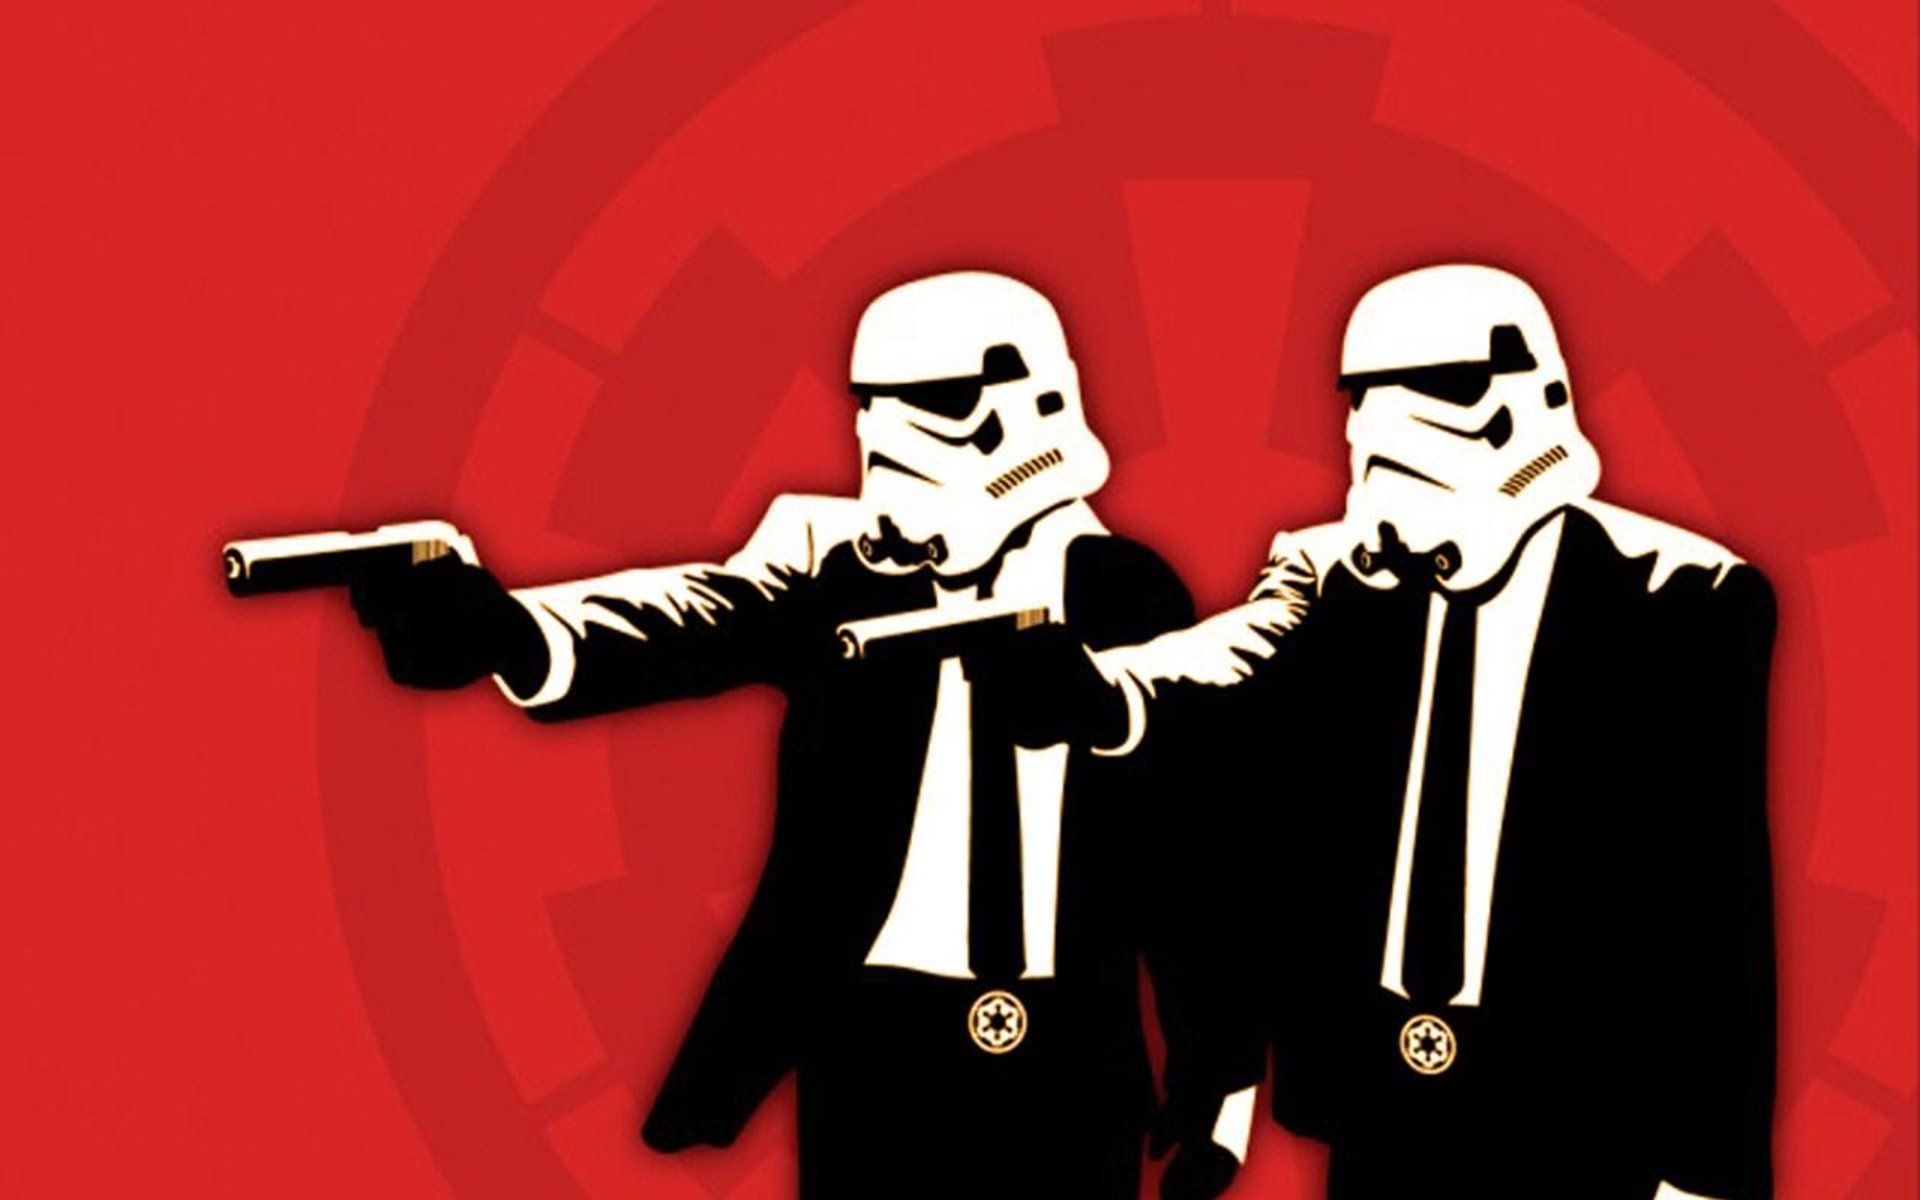 Red stormtroopers Pulp Fiction wallpaper 1920x1200 253546